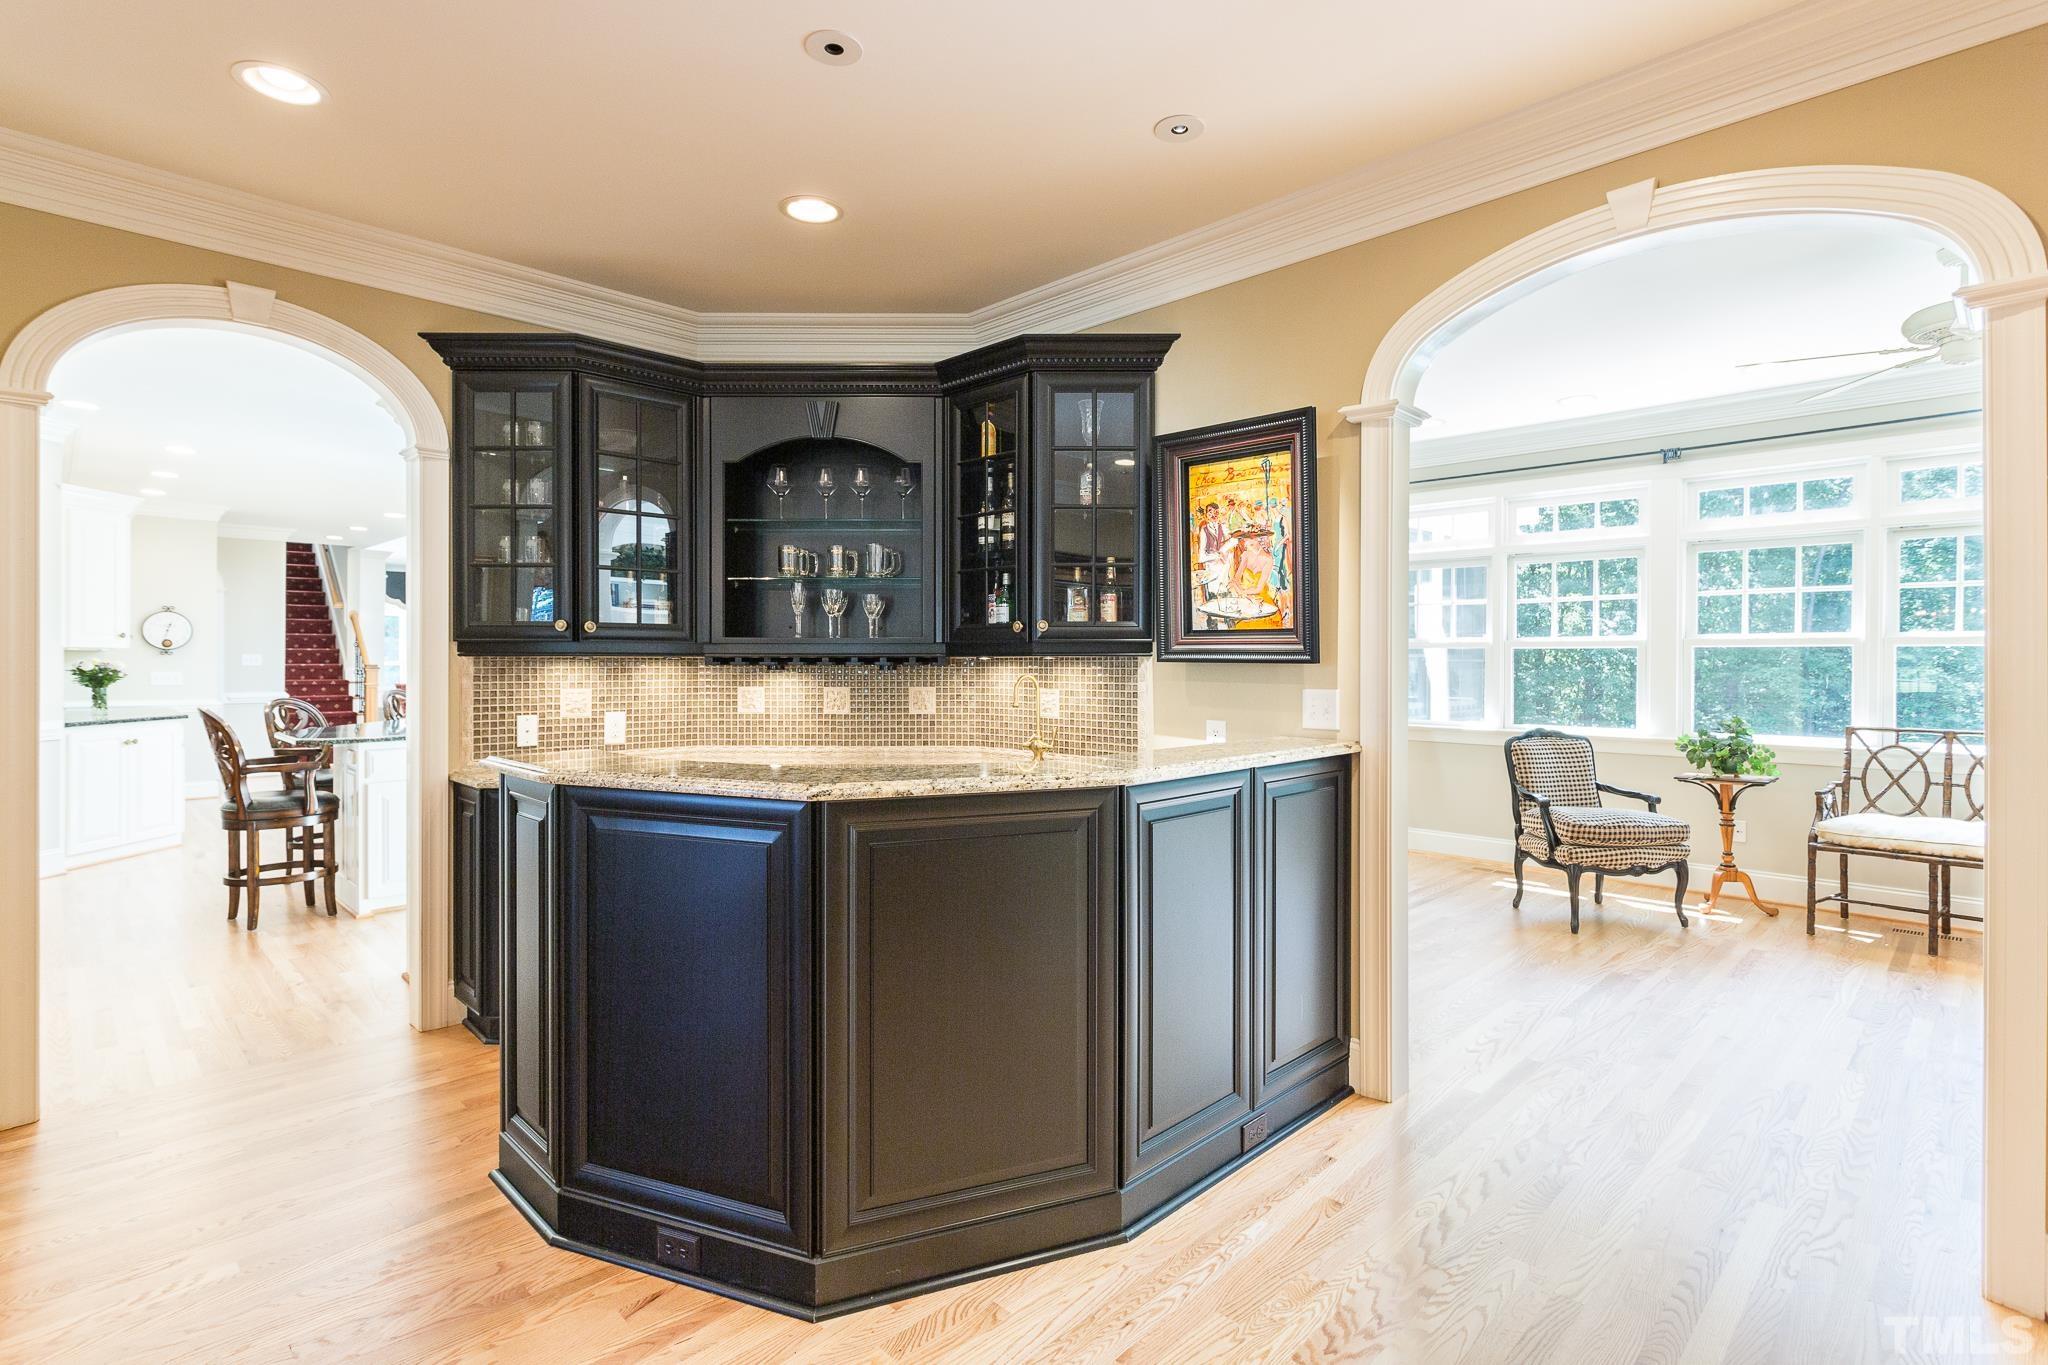 The bar is centrally located between the kitchen, dining room, sunroom and theater room and lends itself to entertaining. It offers glass front cabinets, tile backsplash, granite counters, and a beverage refrigerator